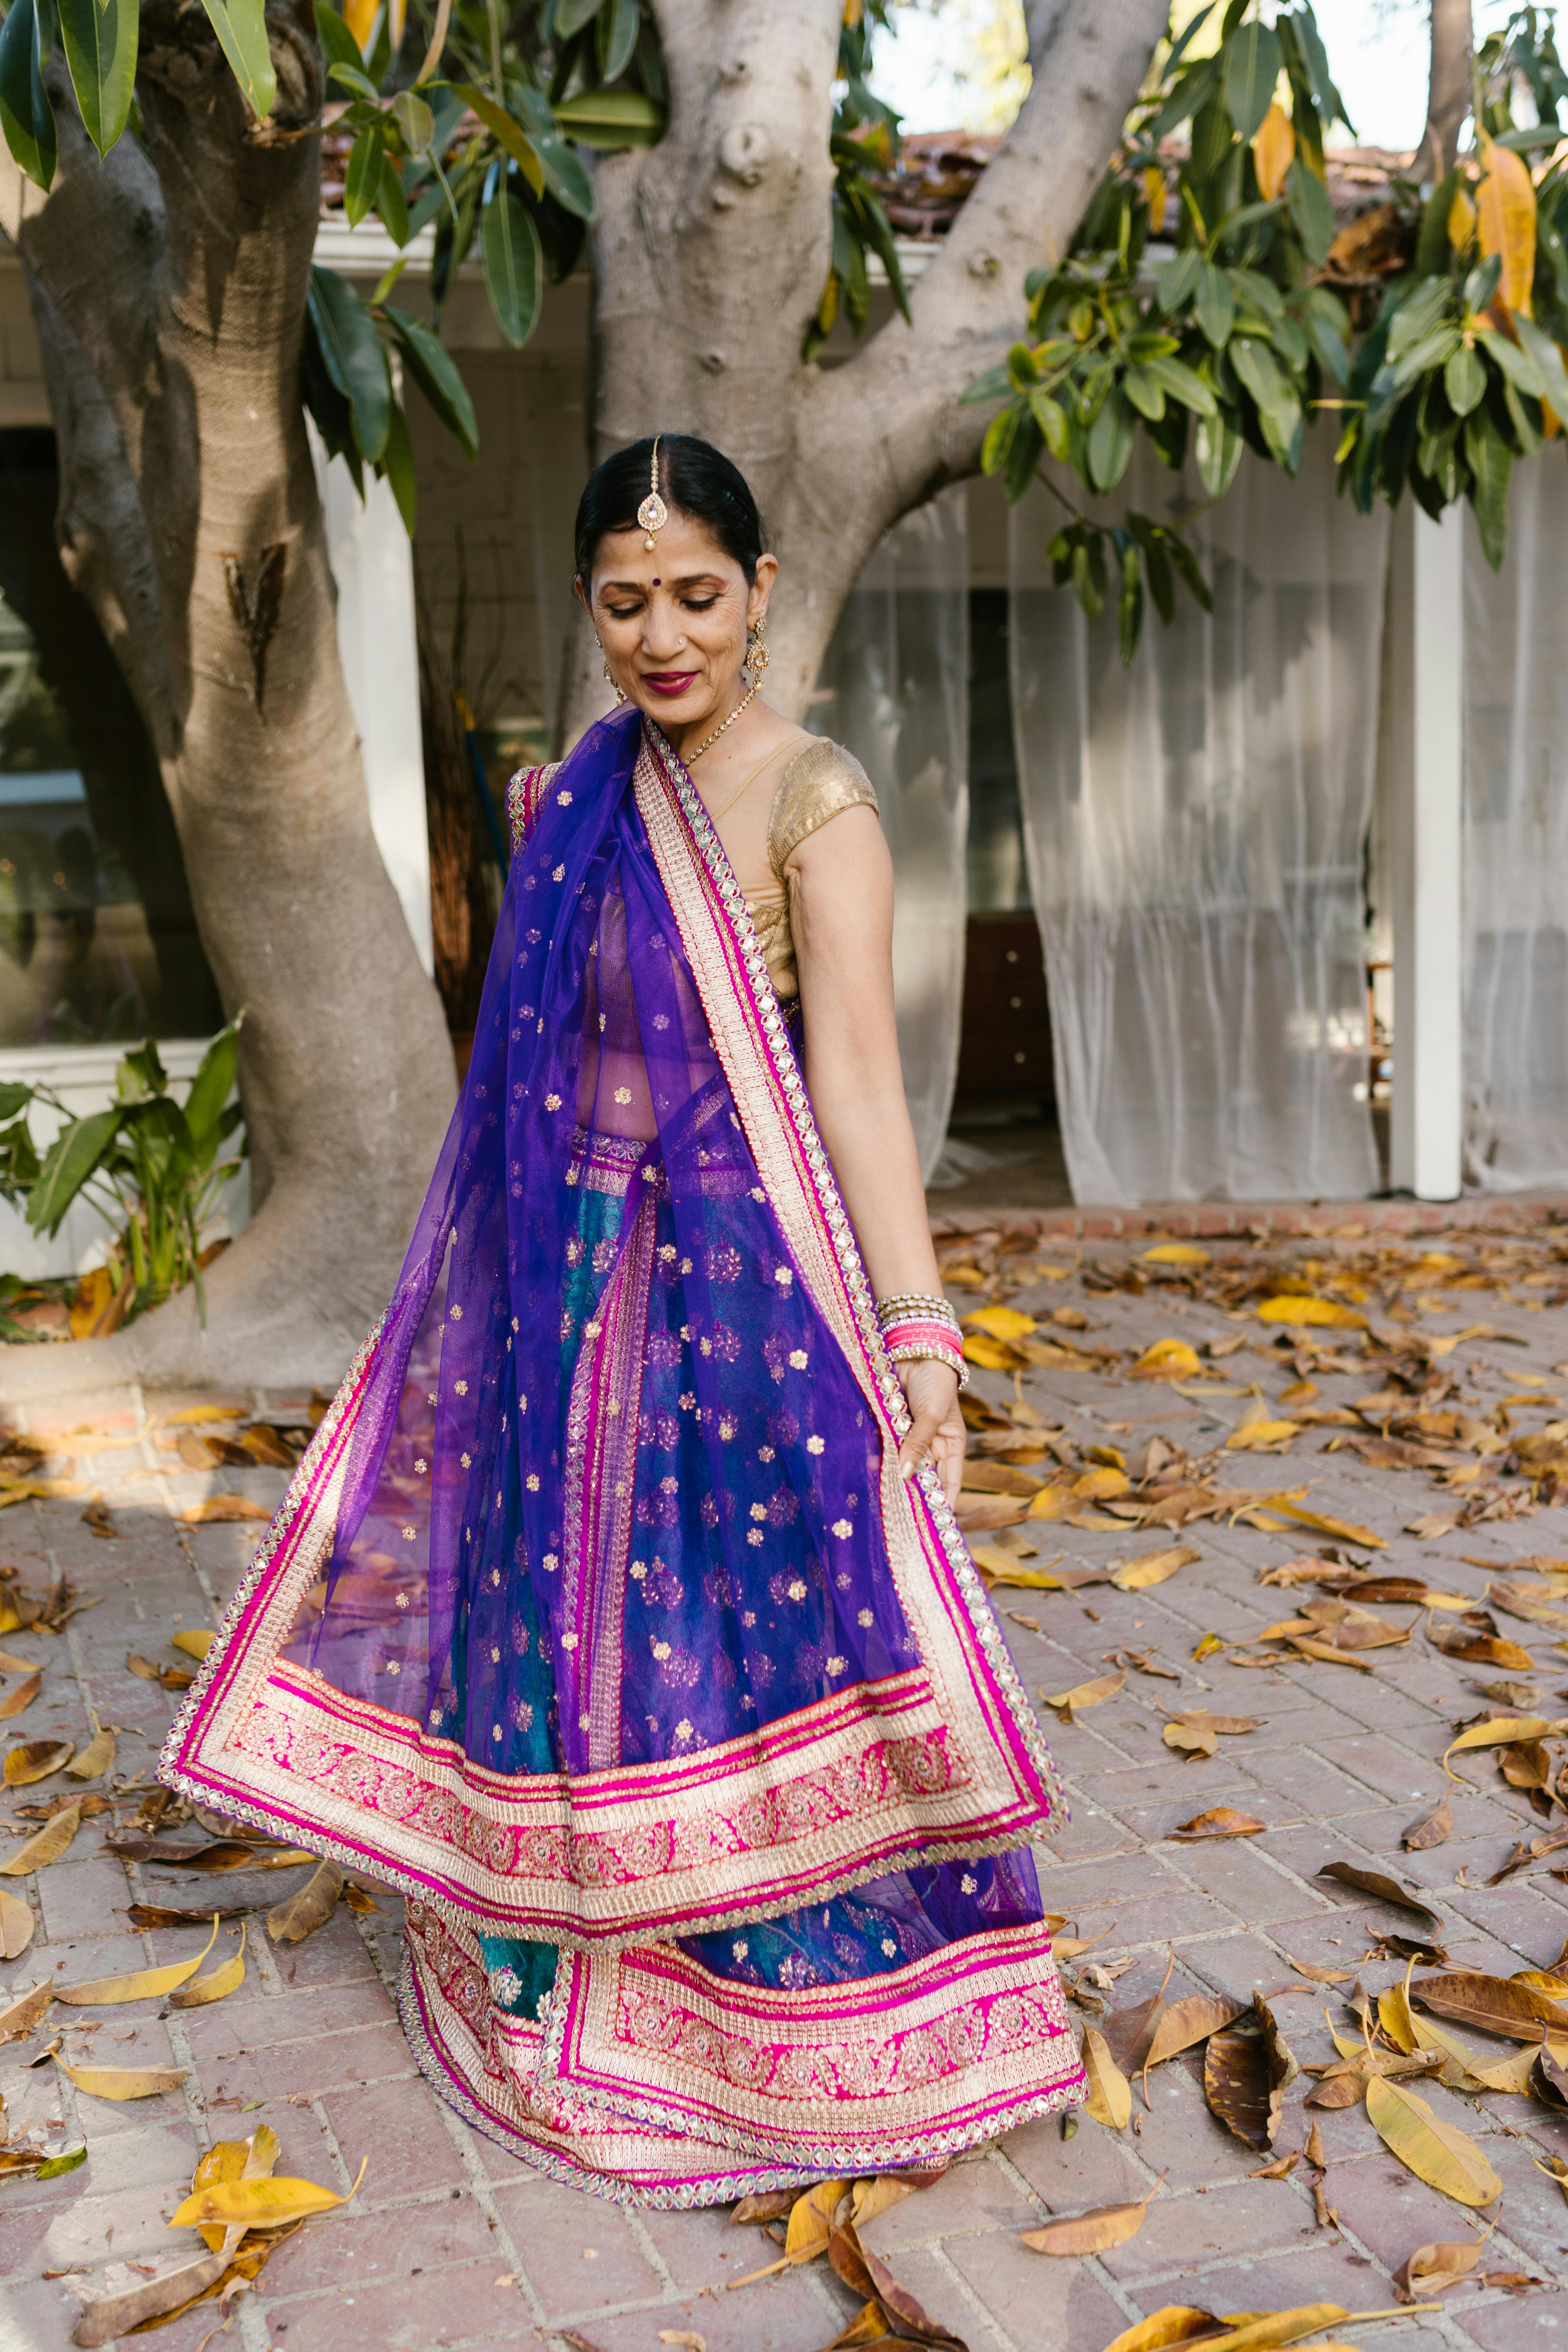 A Woman in a Purple Saree Standing Under a Tree · Free Stock Photo